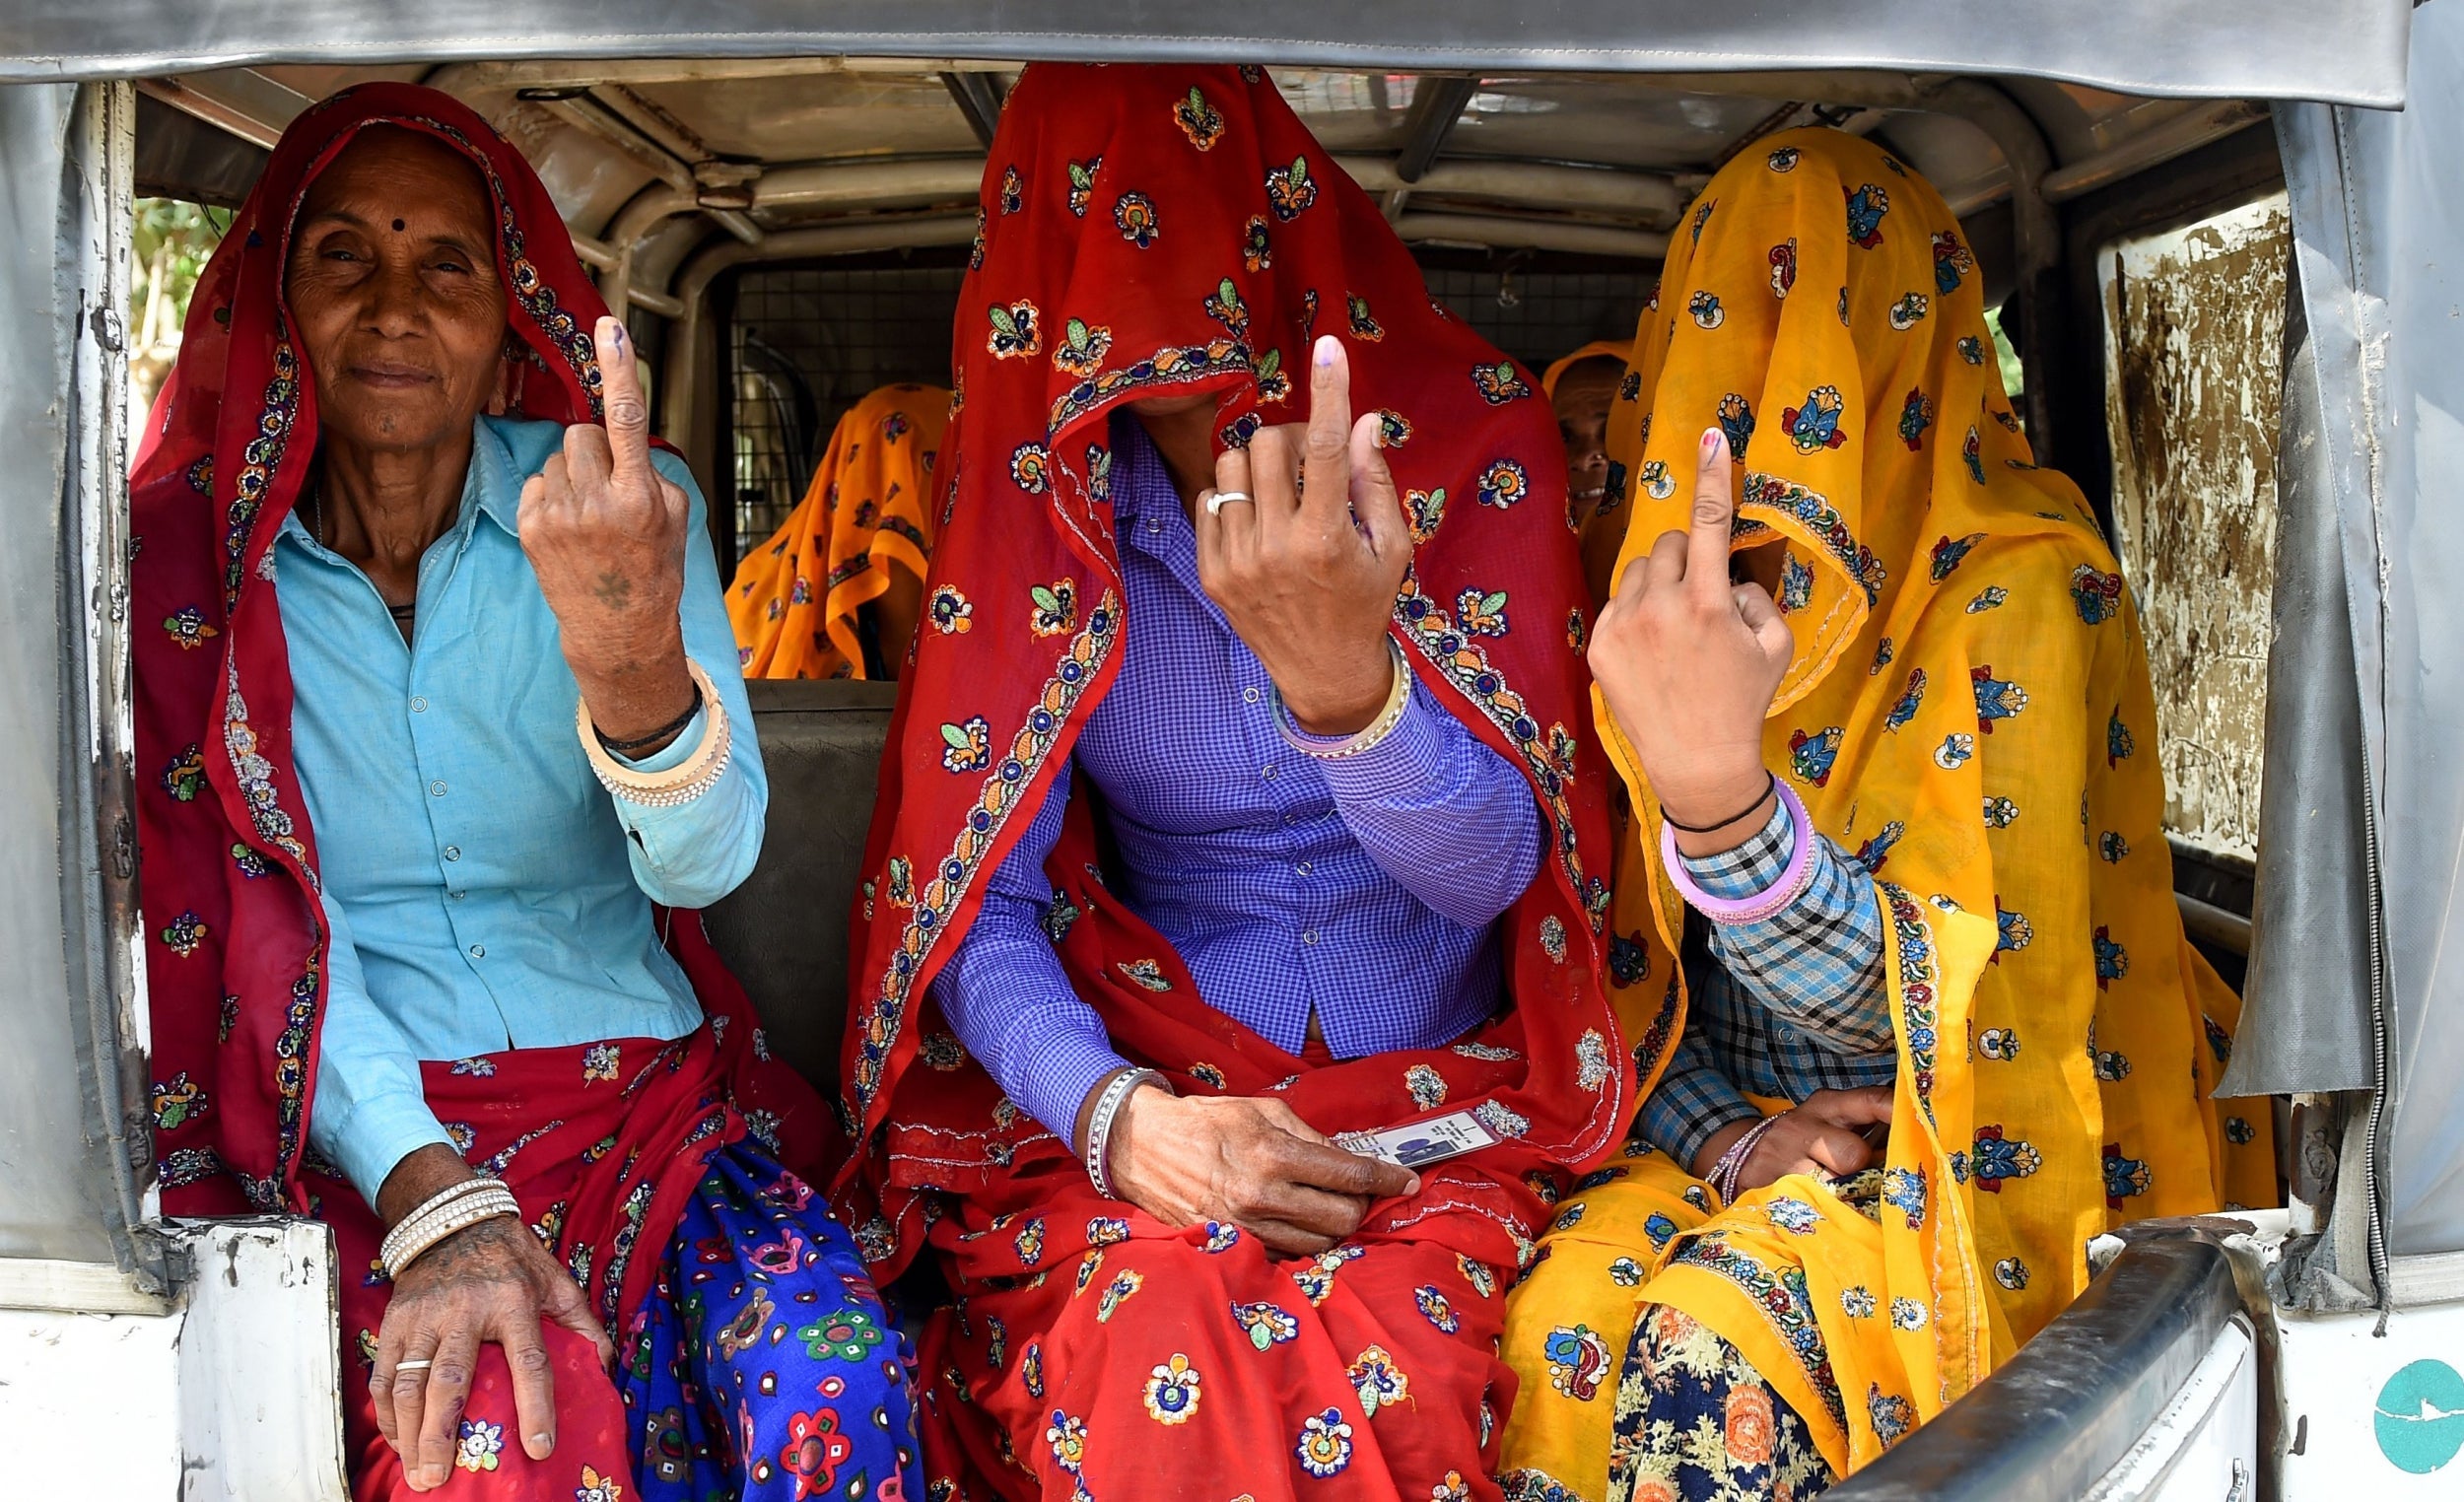 Indian Women Offered Free Public Transport In Bid To